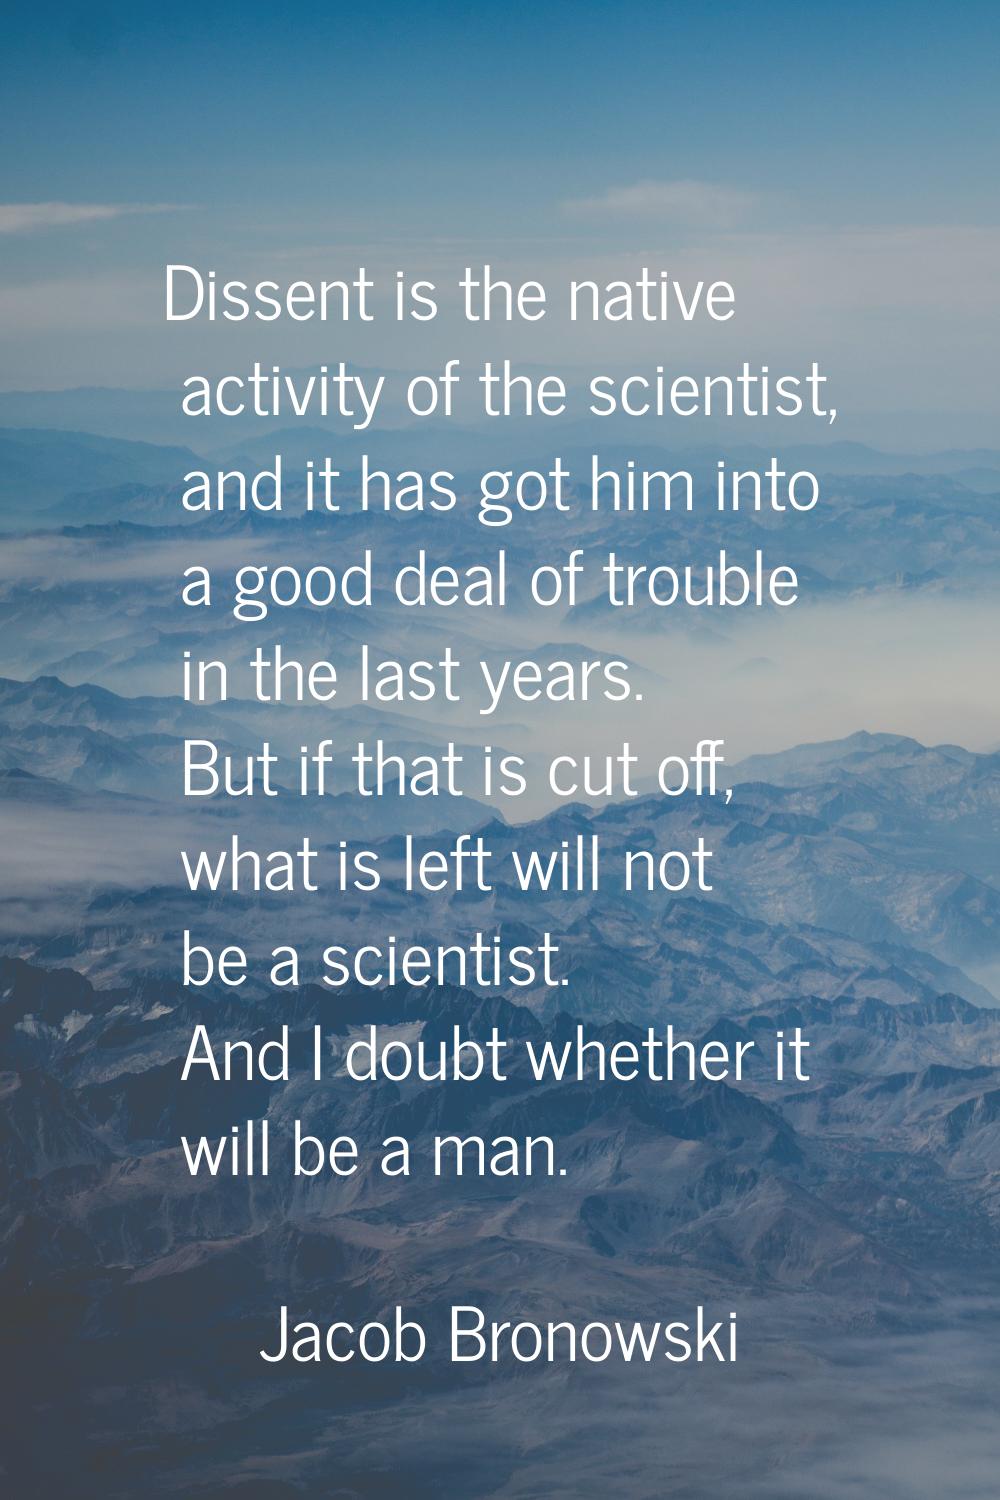 Dissent is the native activity of the scientist, and it has got him into a good deal of trouble in 